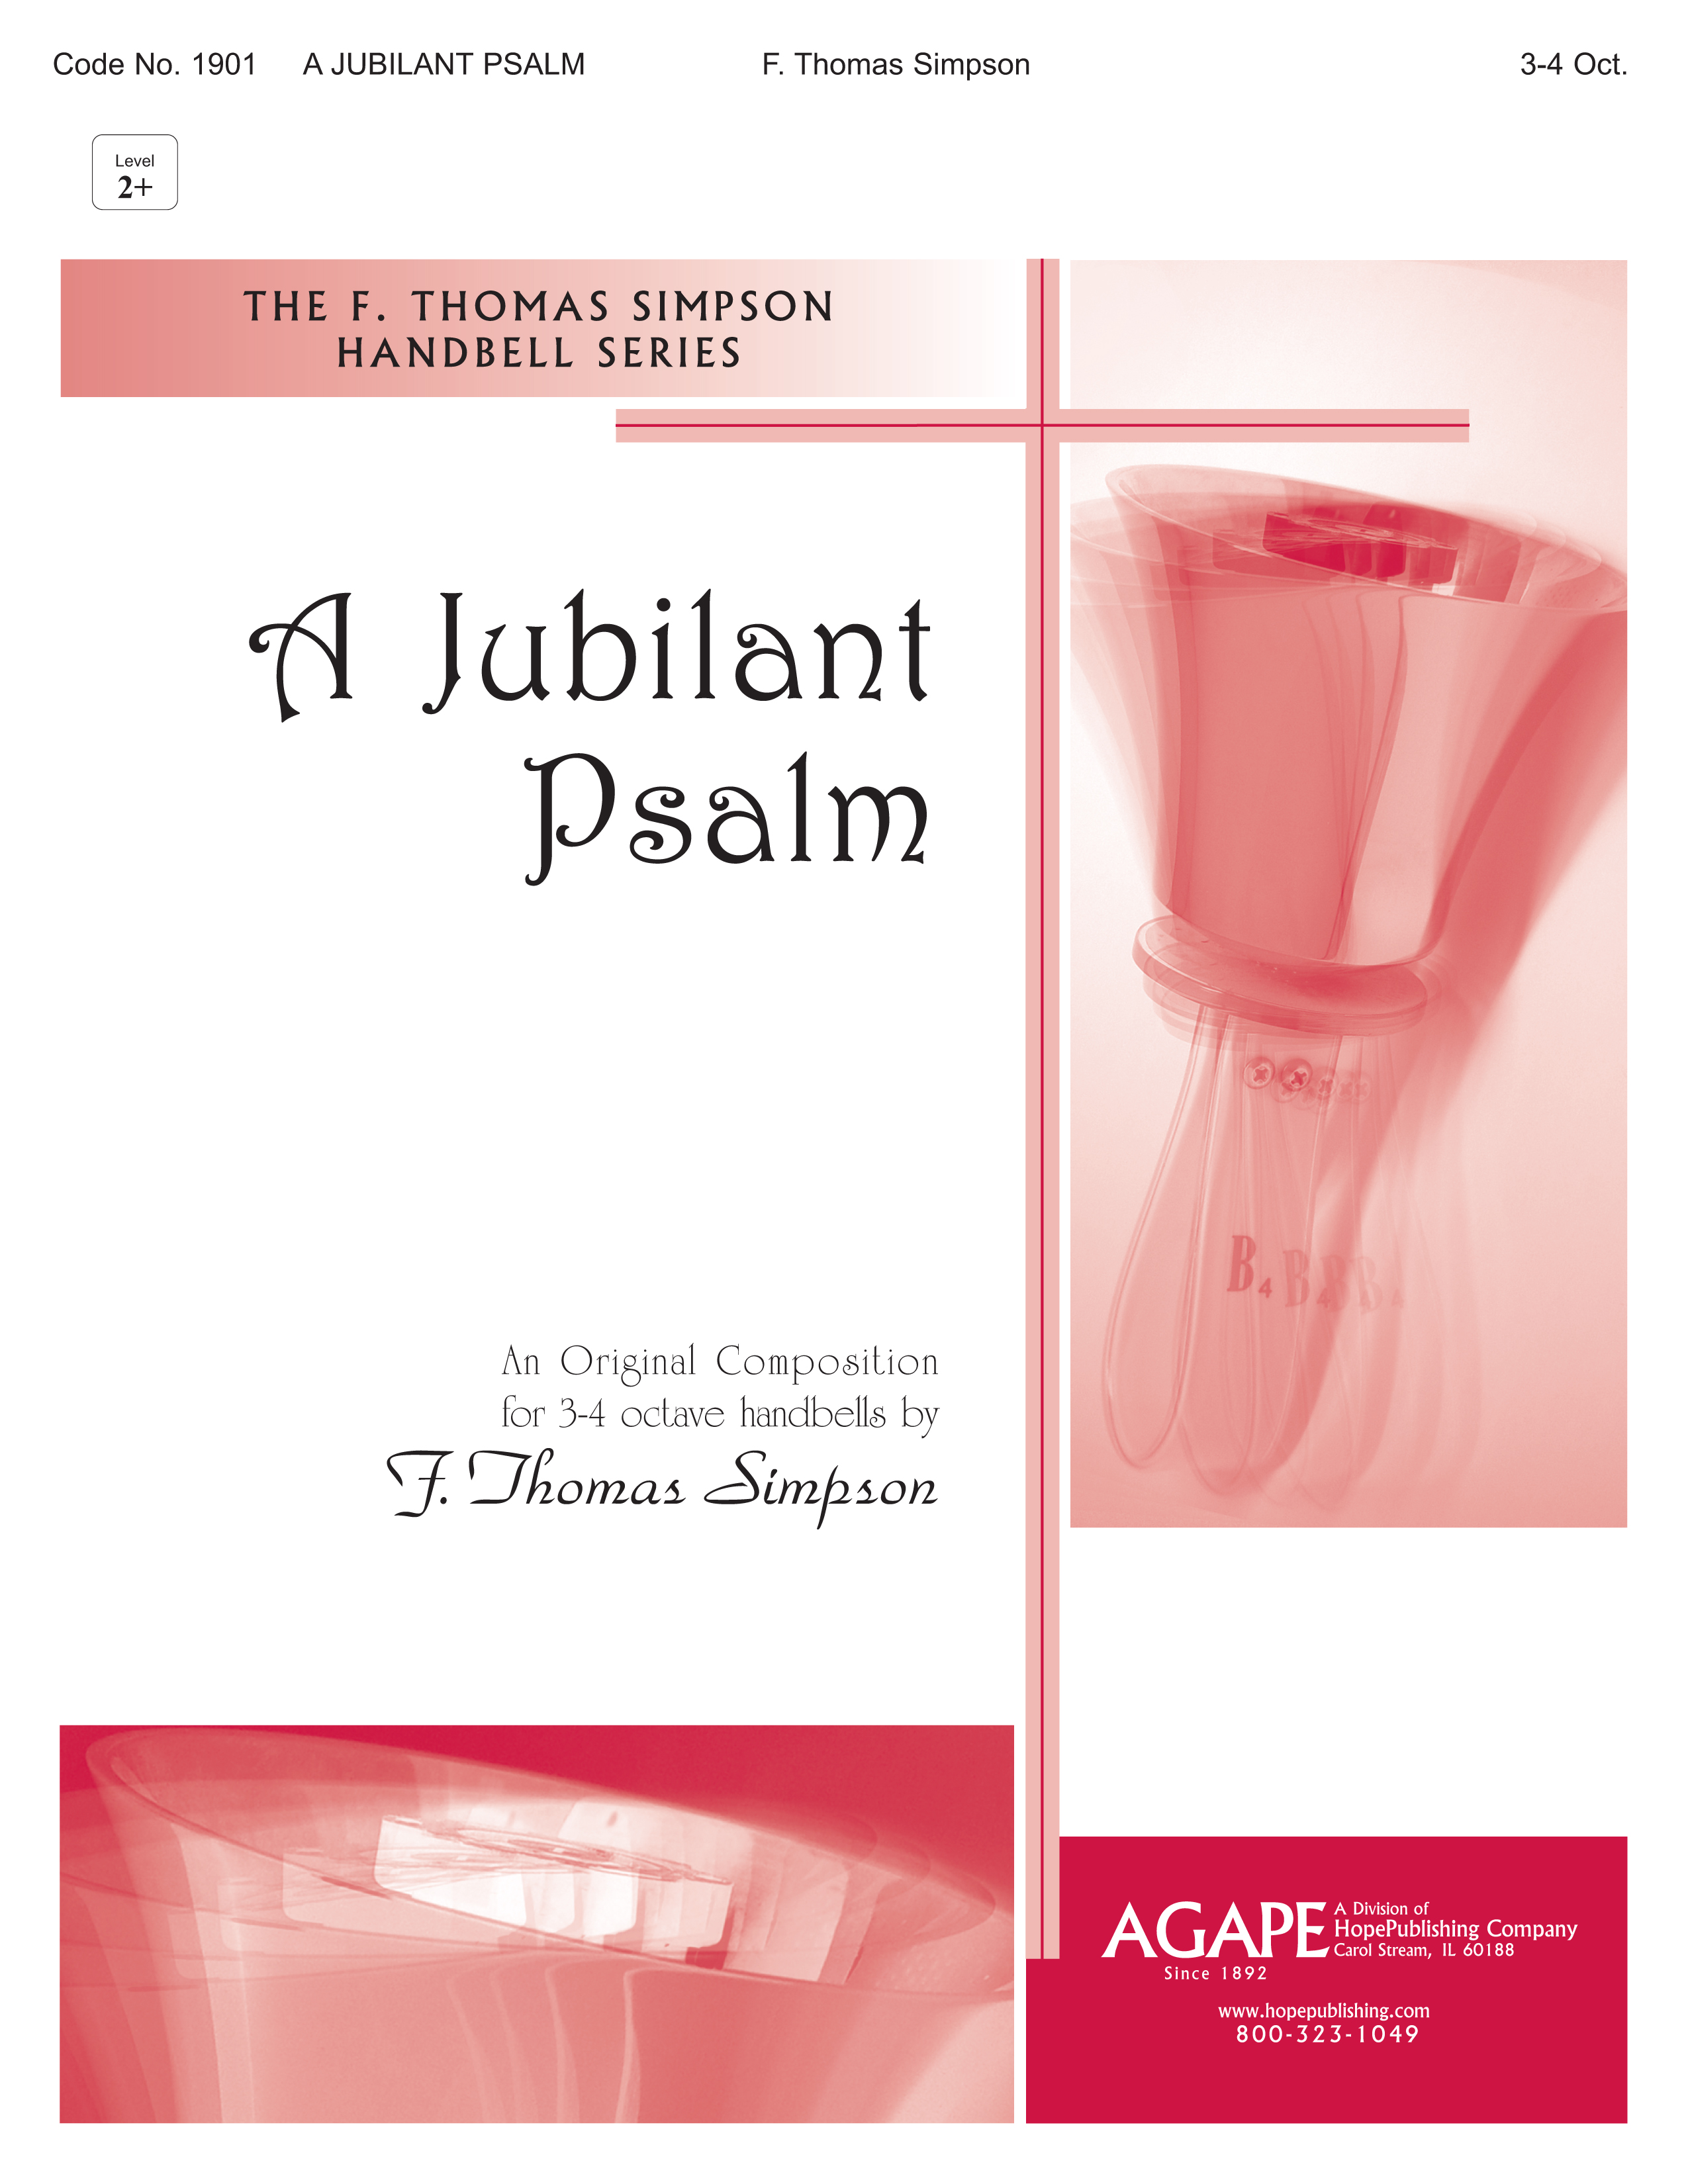 Jubilant Psalm A - 3-4 oct. Cover Image